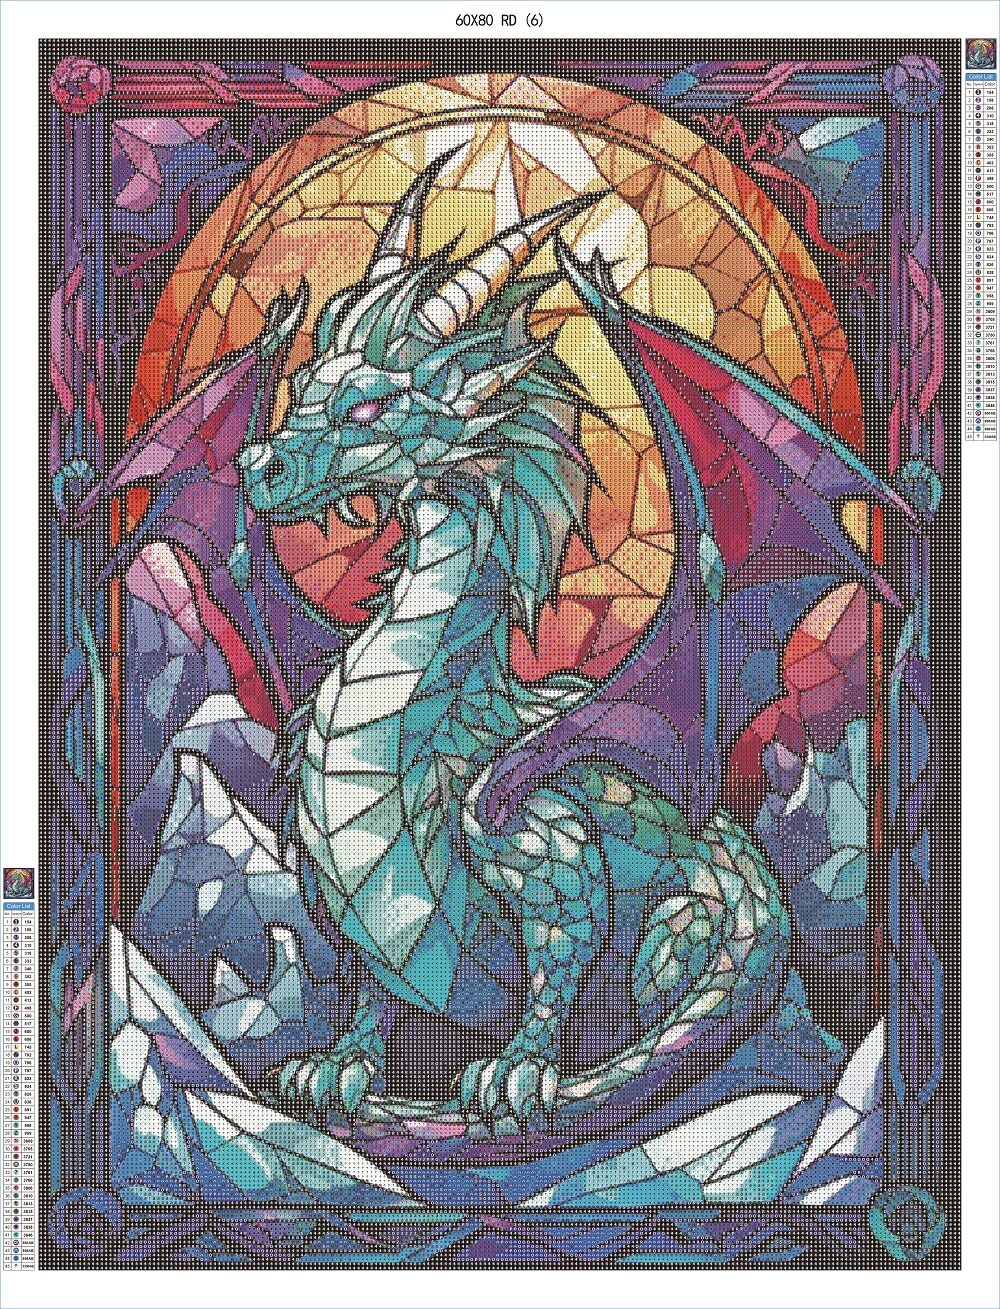 Stained Glass Dragon 60x80 RD - AB Diamond Painting